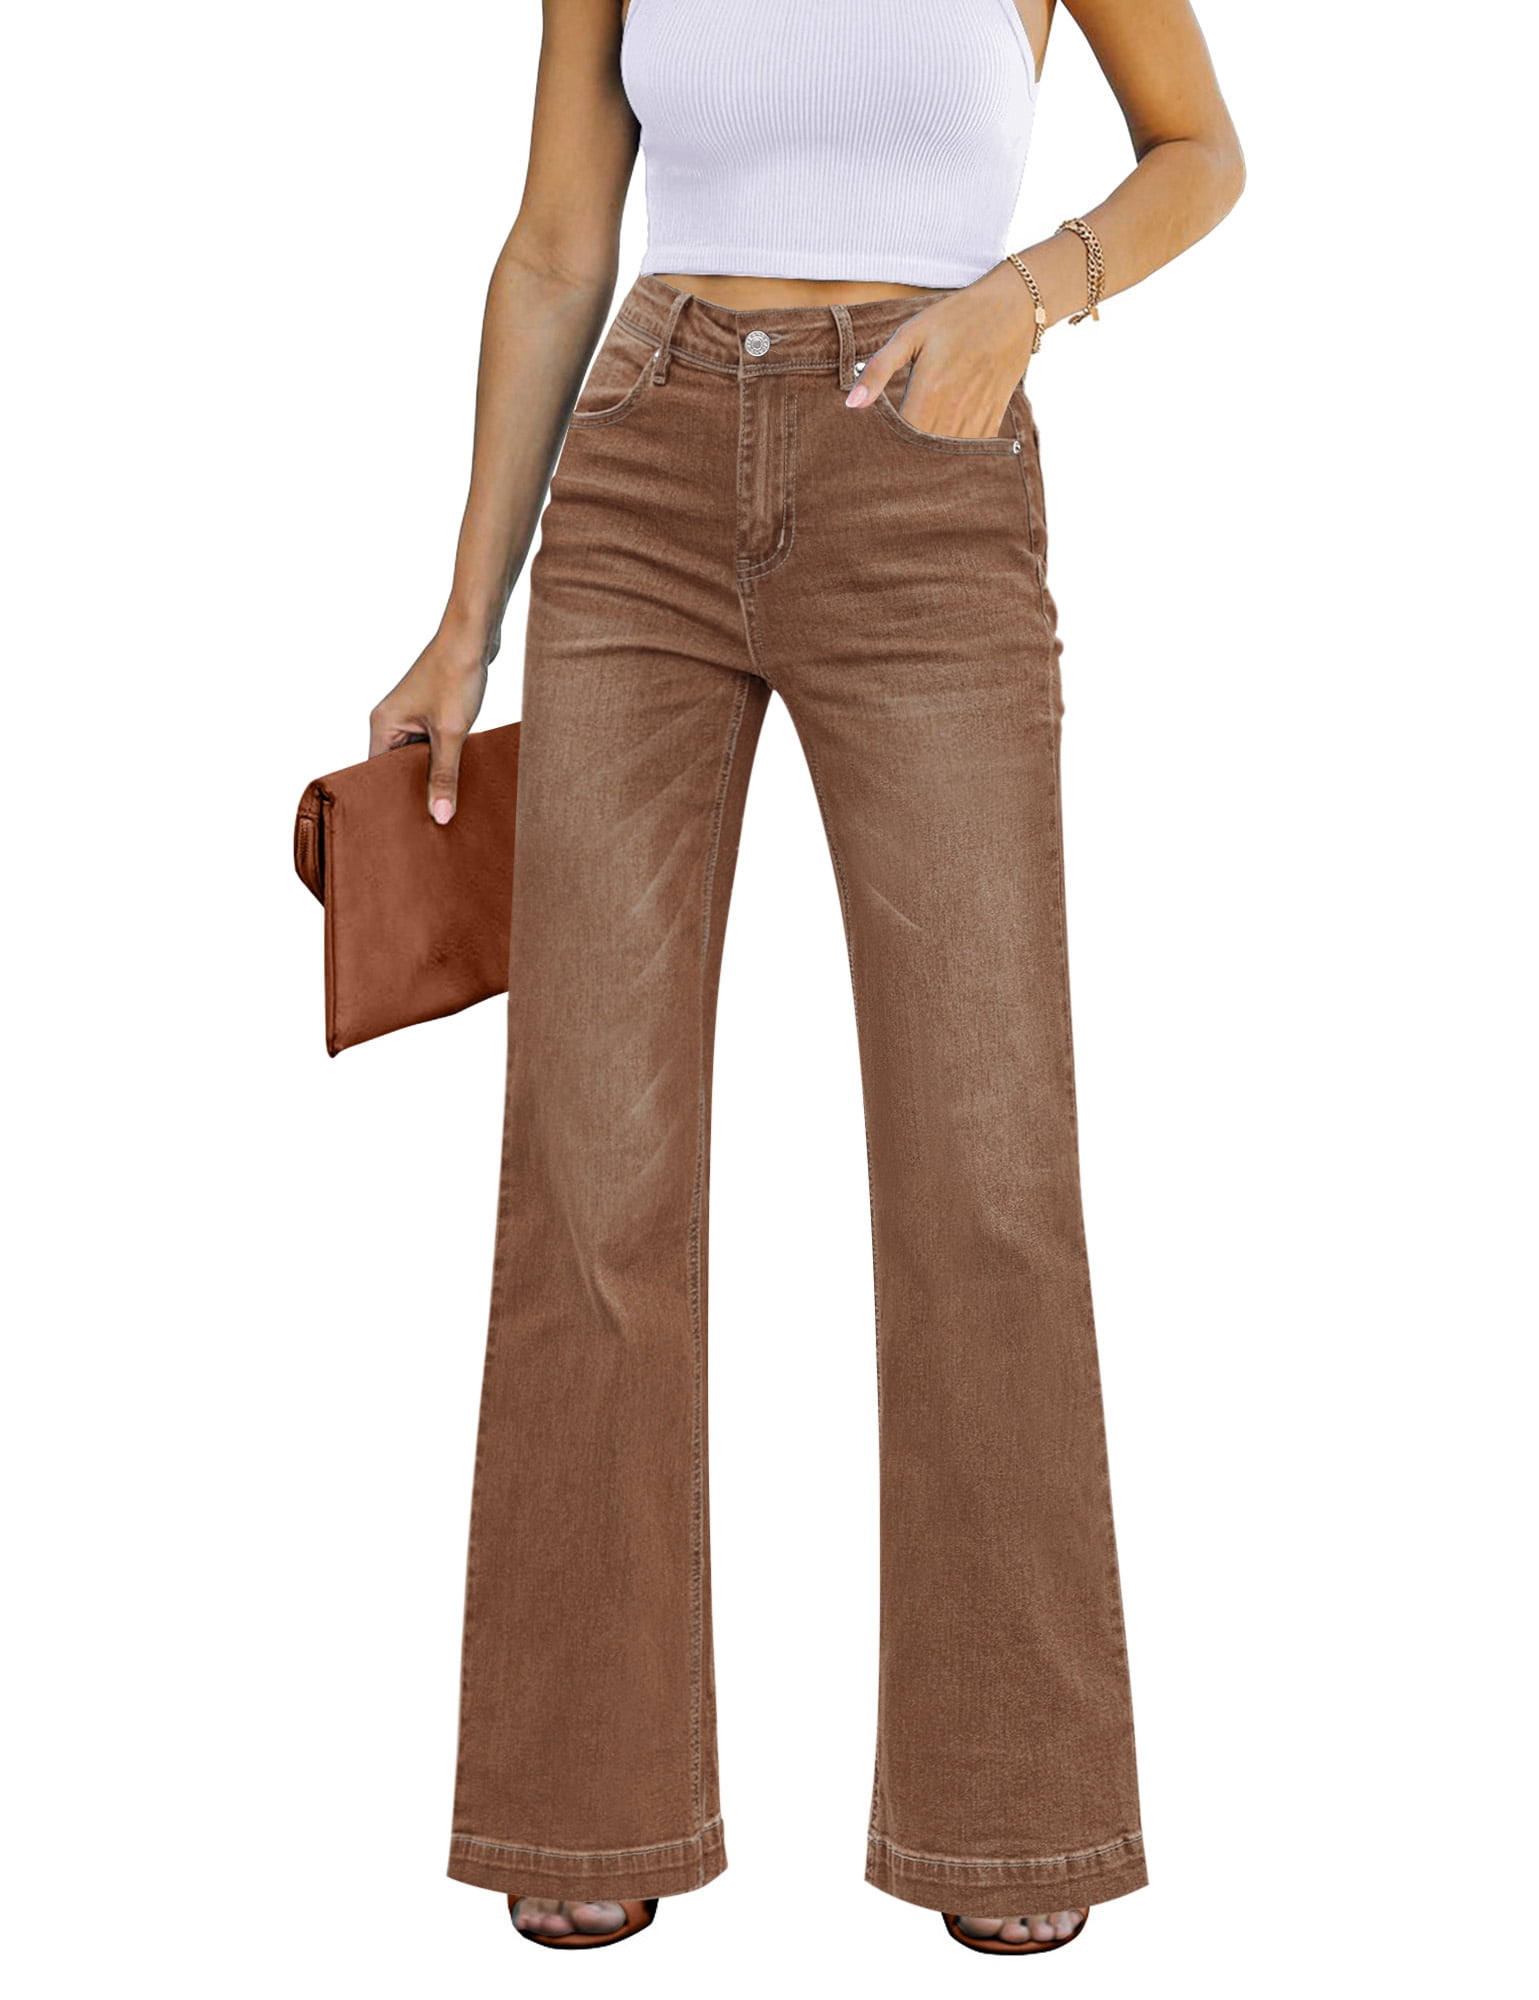 7 Colors That Look Great Paired With Brown | Jeans outfit women, Colourful  outfits, Brown jeans outfit